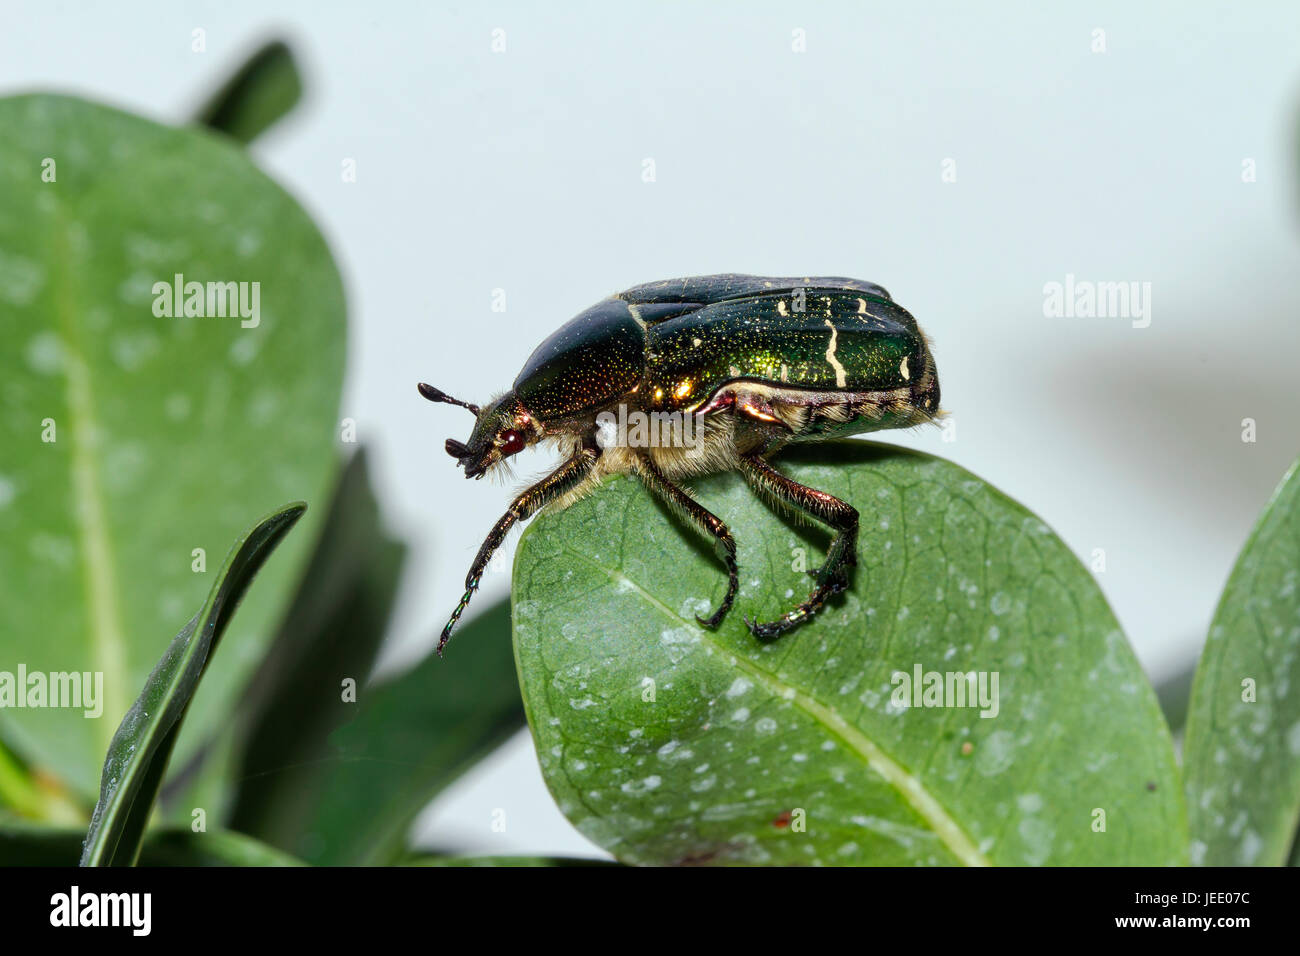 Green rose chafer on a leaf Stock Photo